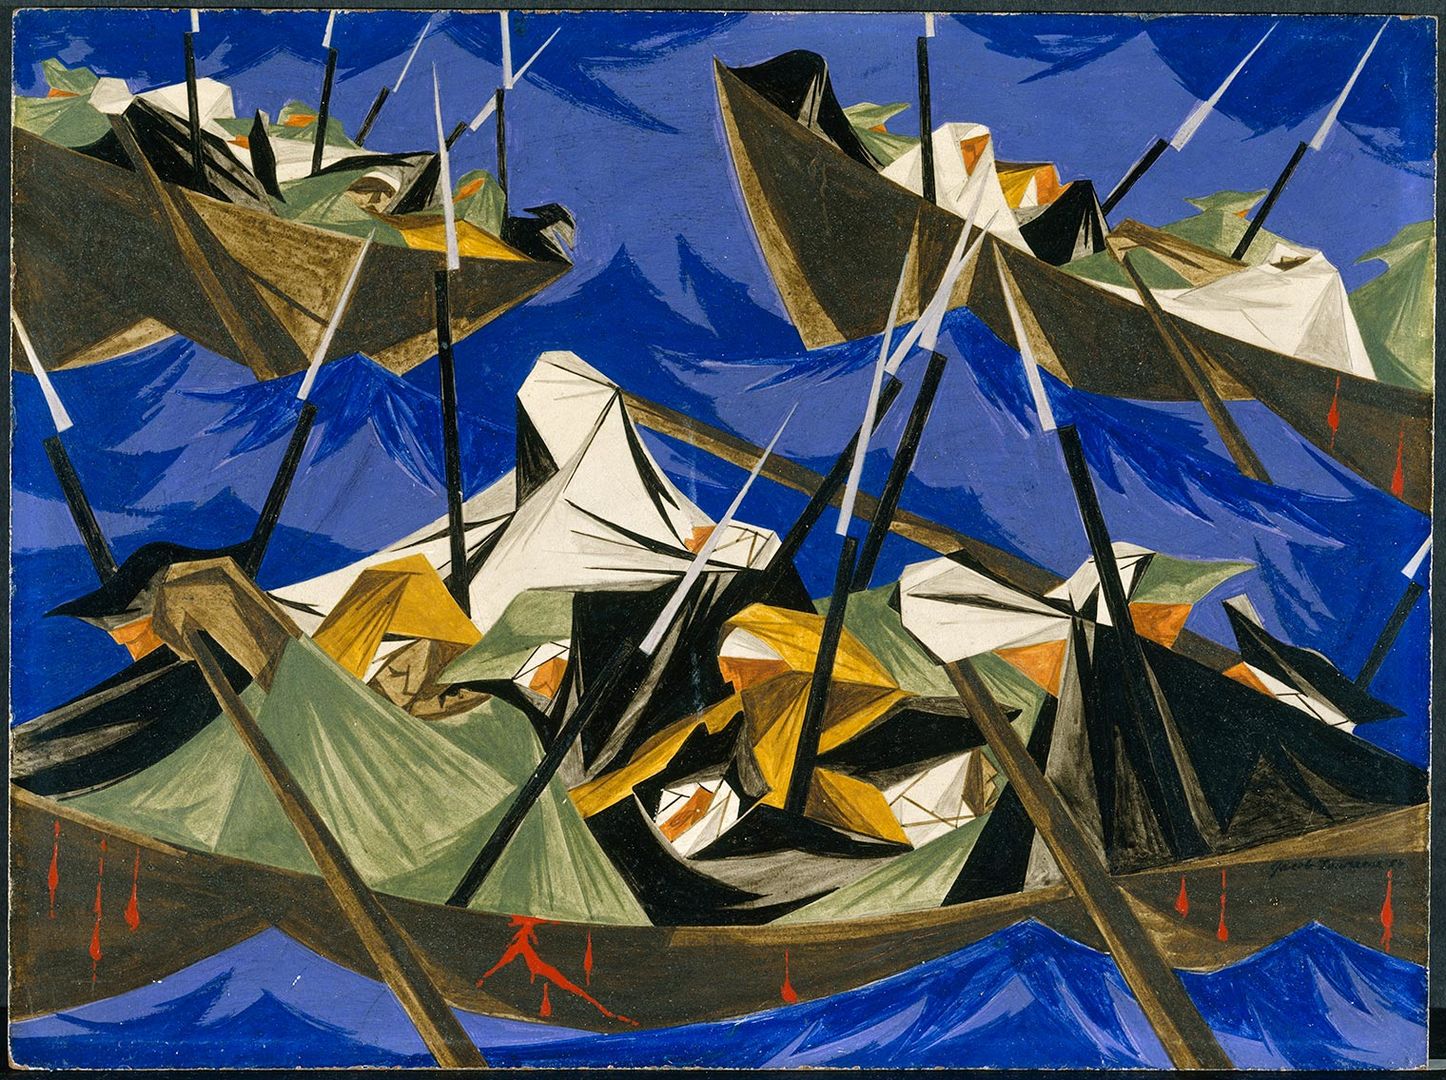 Abstract painting by Jacob Lawrence features Washington and his troops crossing the Delaware River. Three boats of varying distances from the viewer are surrounded by jagged blue waves. In the boats, hooded figures appear to be holding spears. Red blood drips from the sides of the boats.